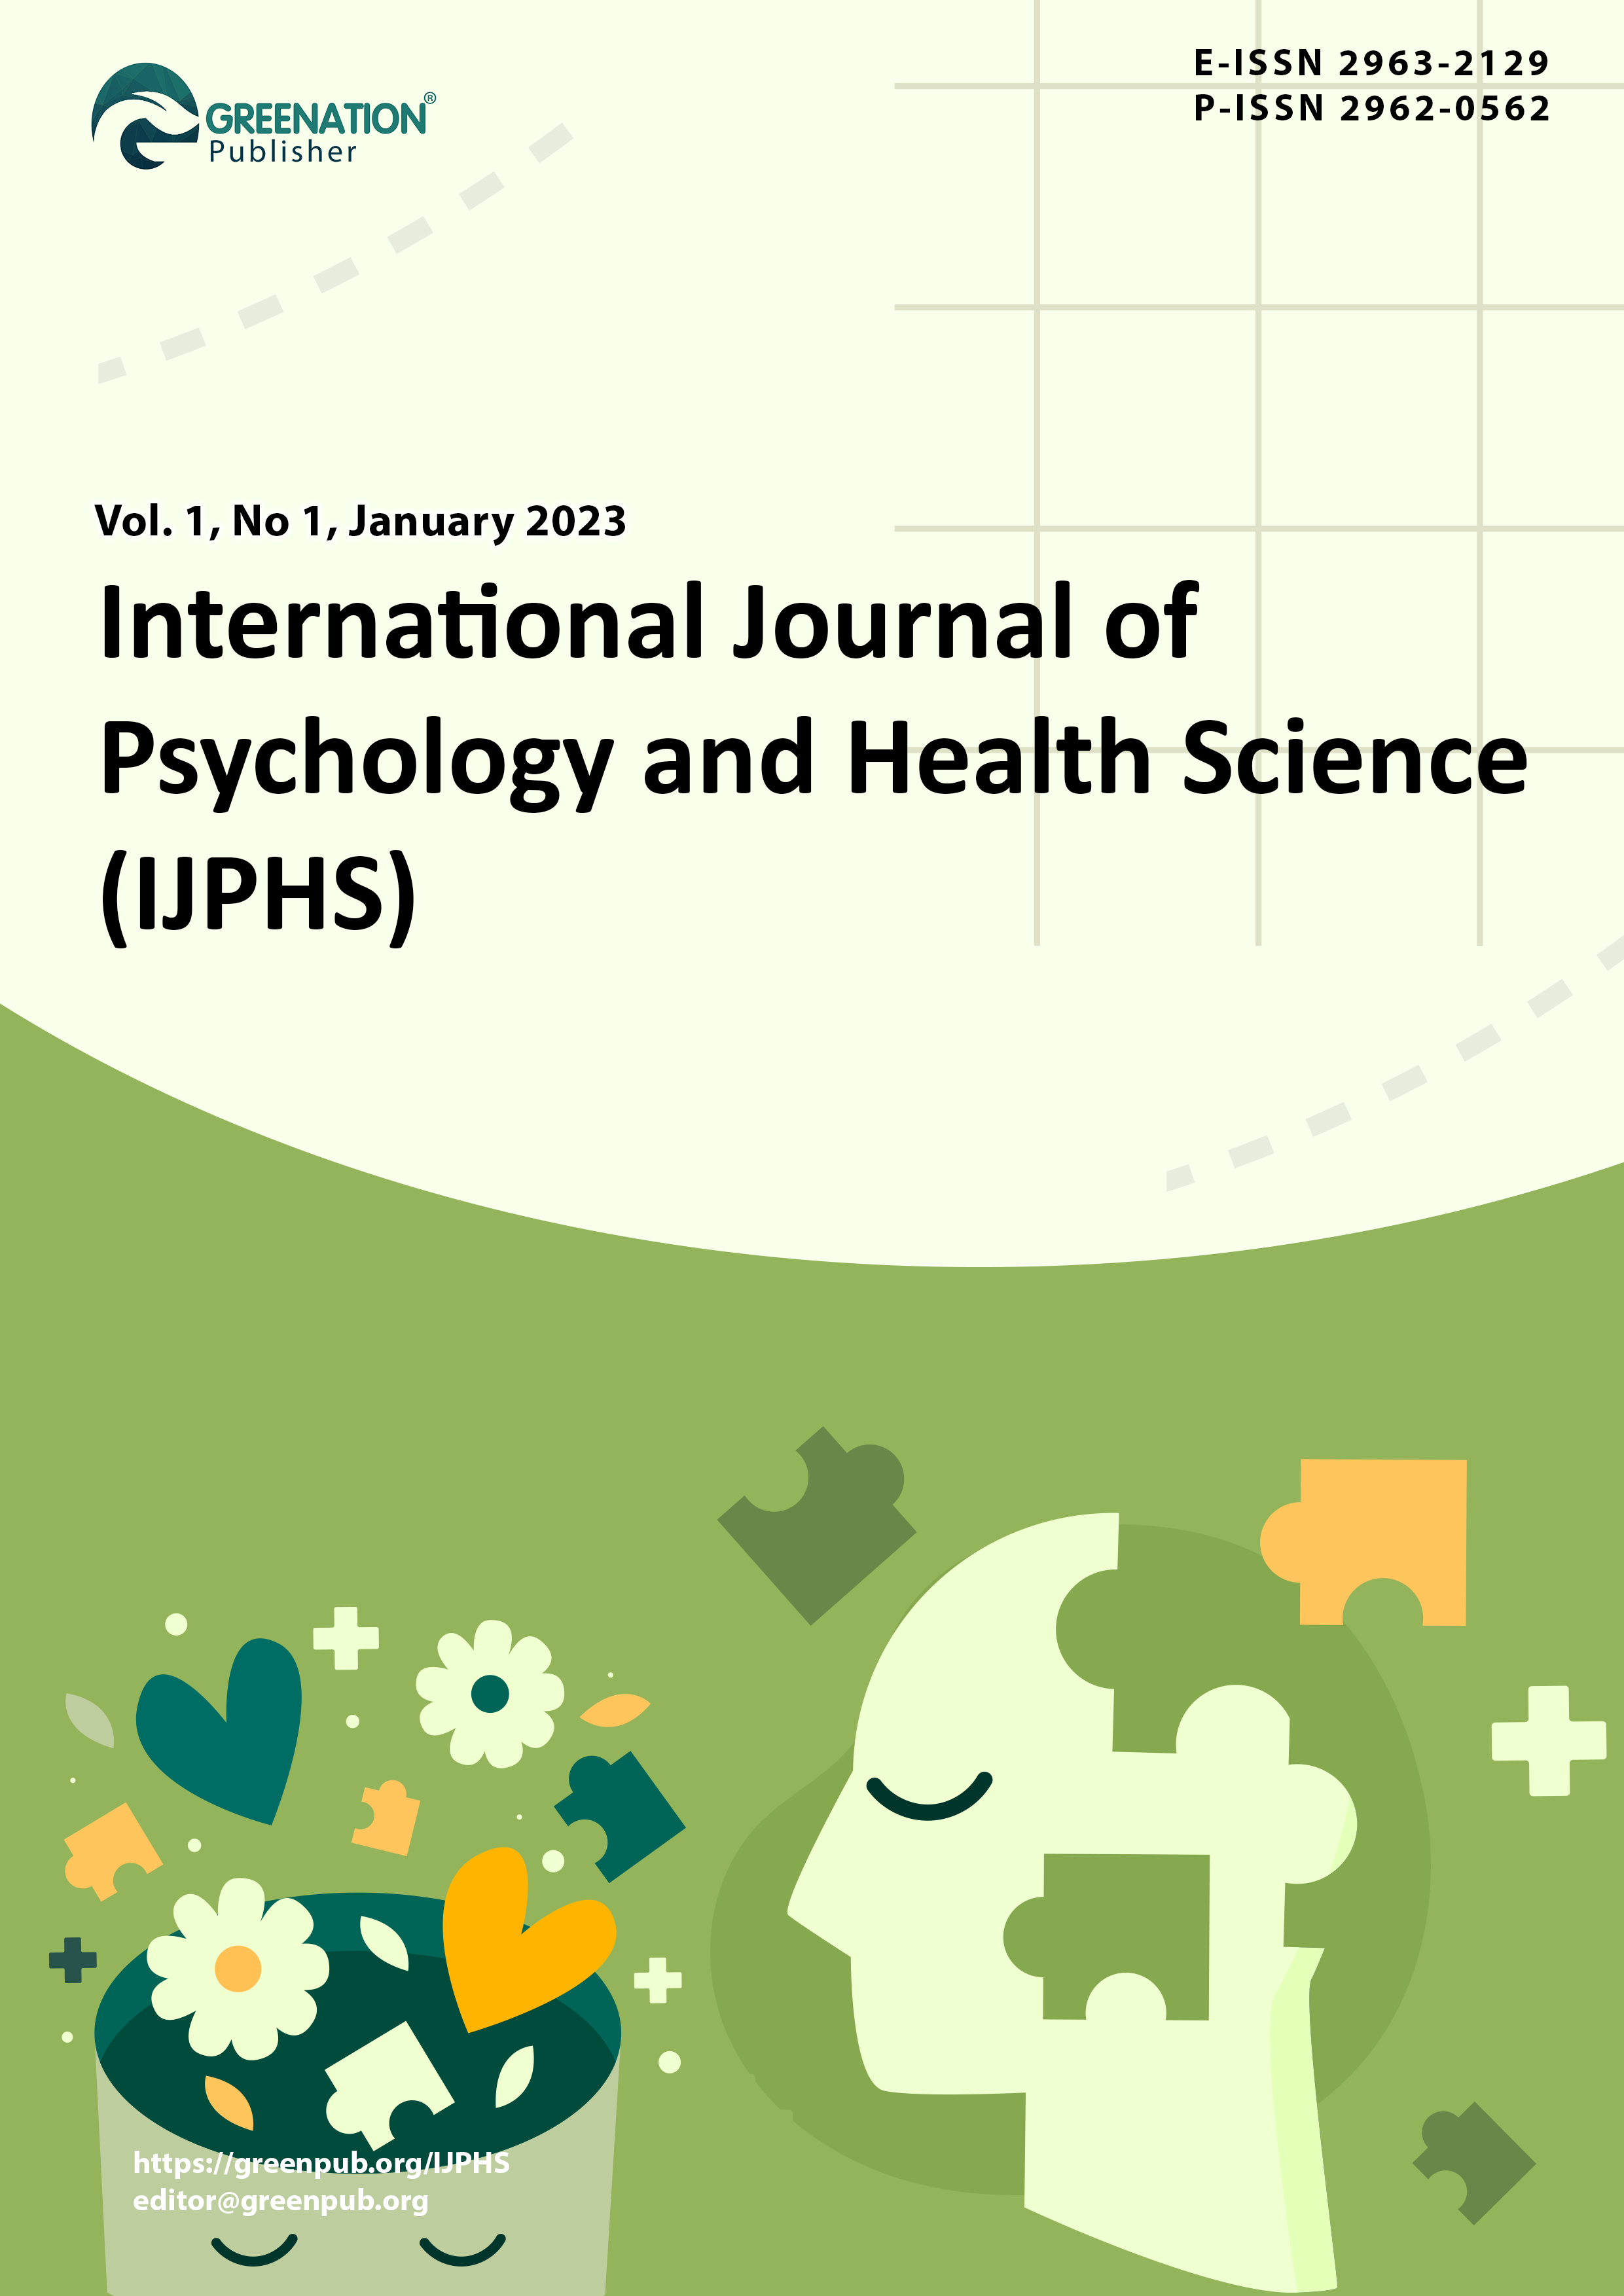 					View Vol. 1 No. 1 (2023): International Journal of Psychology and Health Science (January-March 2023)
				